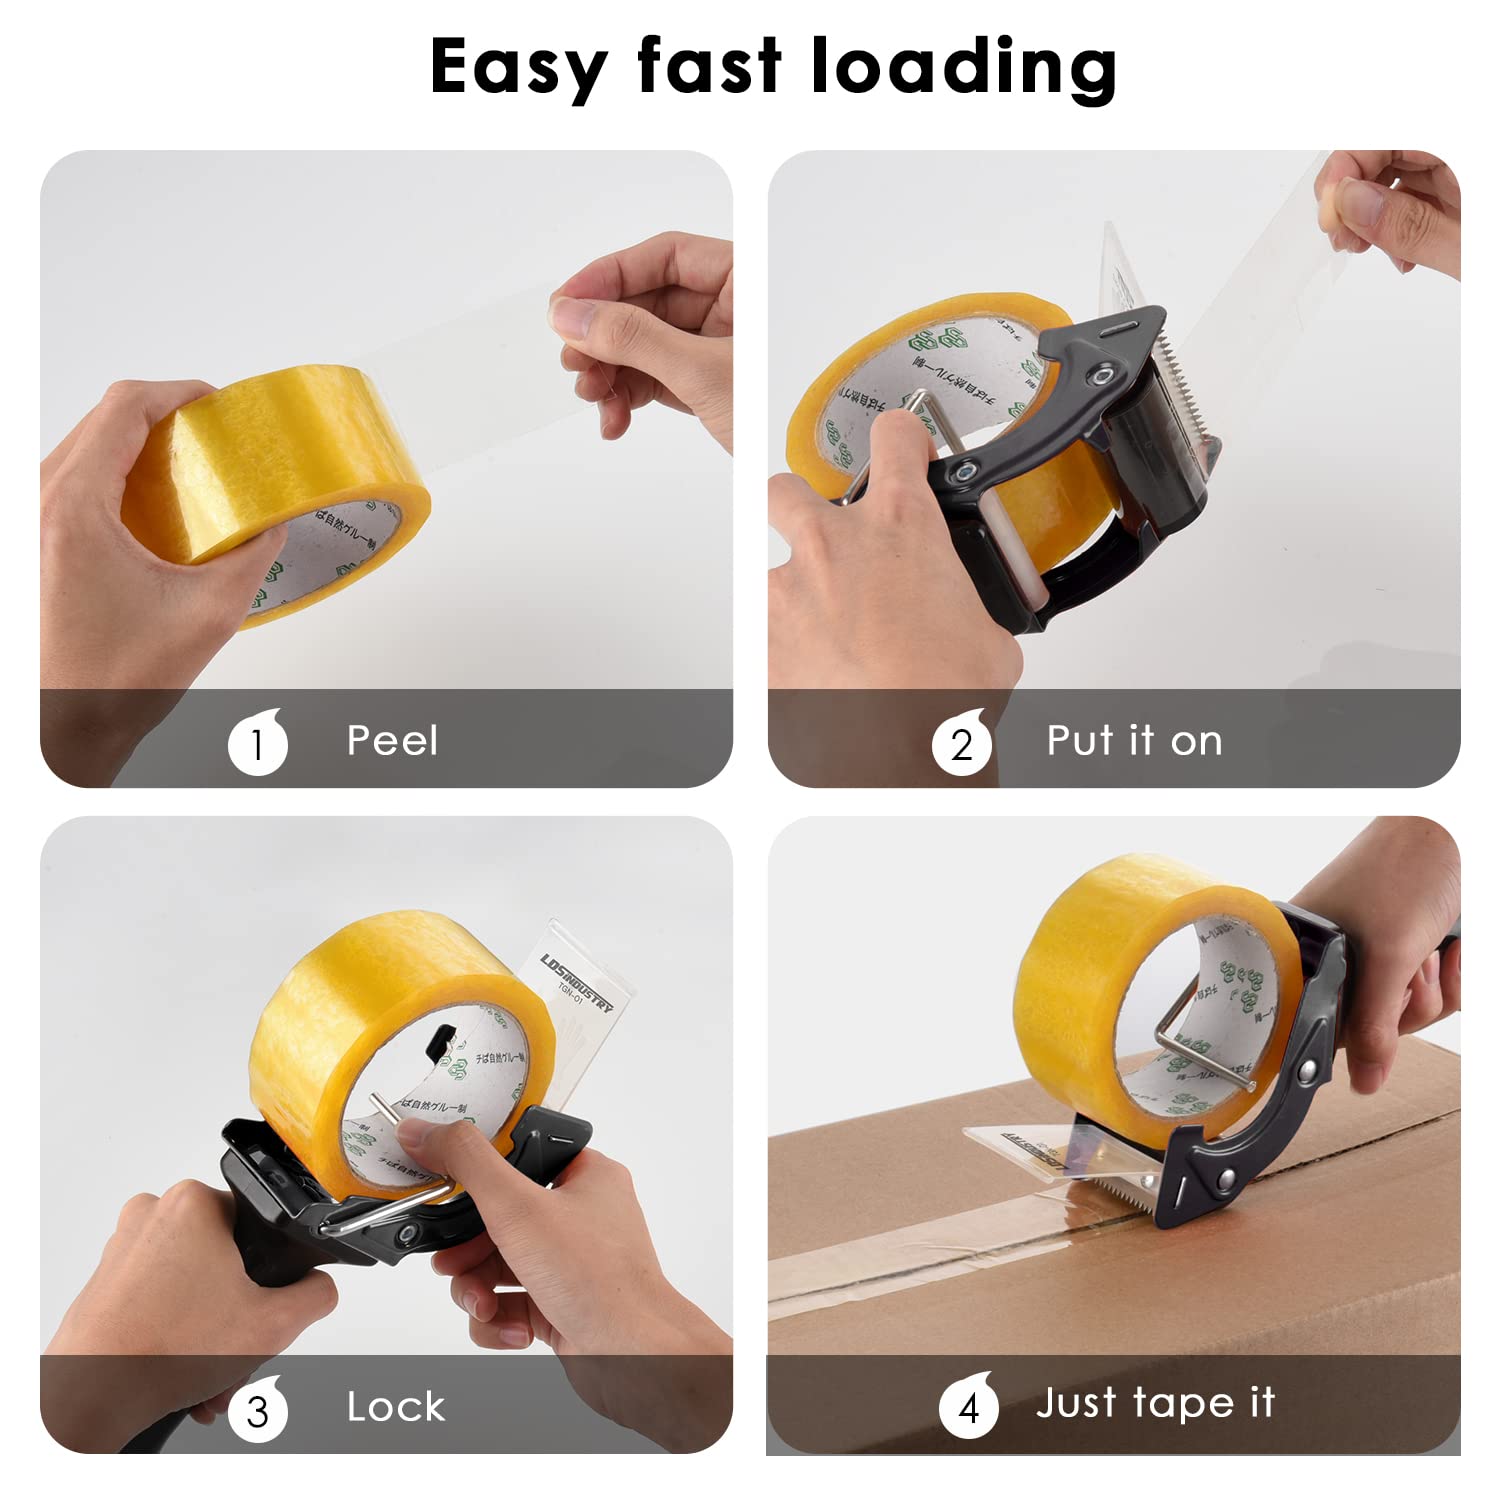 LDS Industry Rapid-Replace Tape Dispenser Gun with 2 Inch X 60 Yard Tape Roll (Transparent) and Extra Blade, Lightweight Ergonomic Heavy Handheld Duty Tape Cutter for Packaging and Box Sealing Black